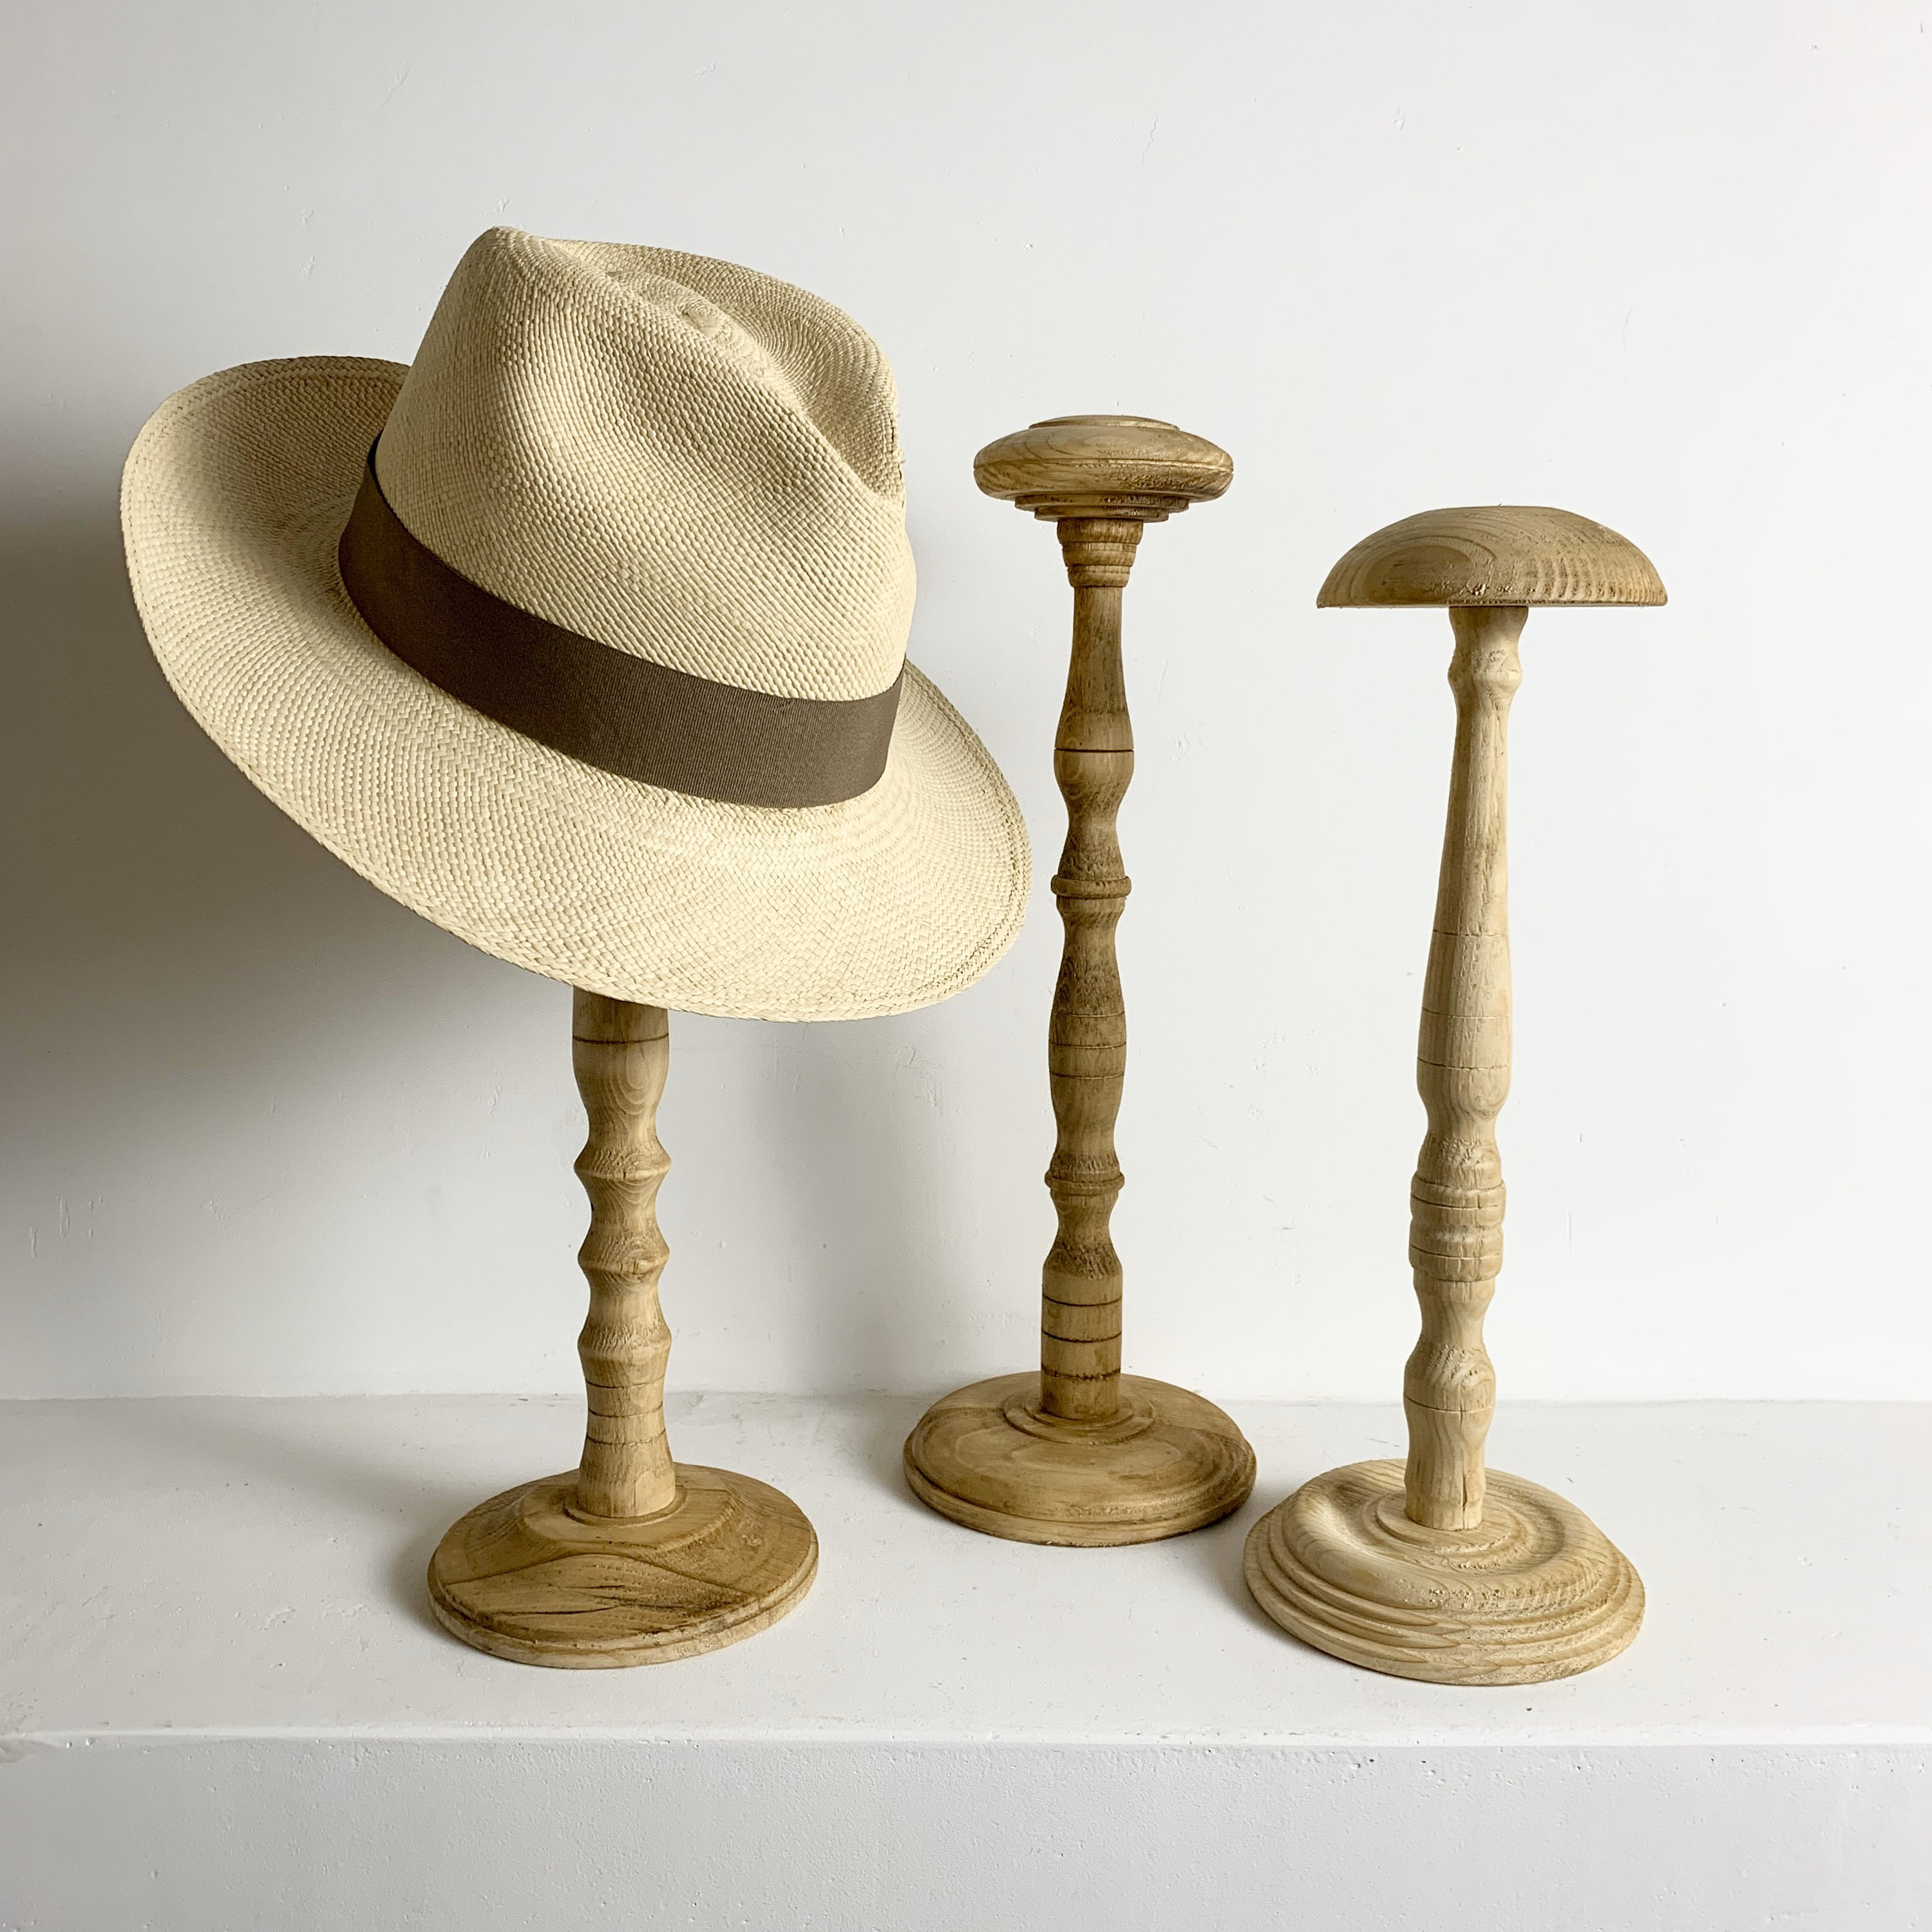 French Vintage Wood Hat Stand - Medium Sized 38-40cm - Turned Pine Wood ...